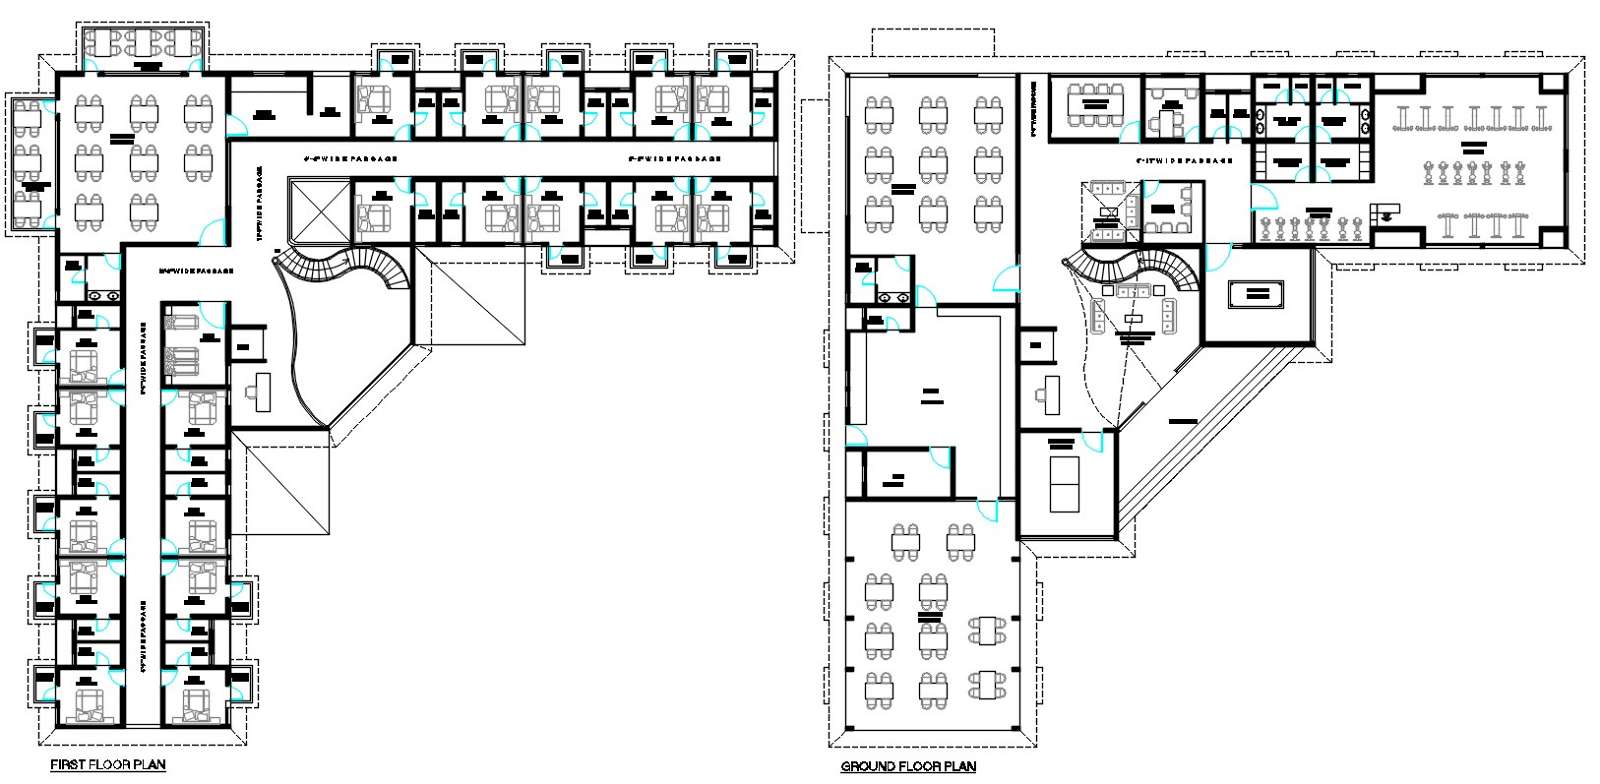 Hotel Building Area Layout Plan And Structure Cad Dra - vrogue.co